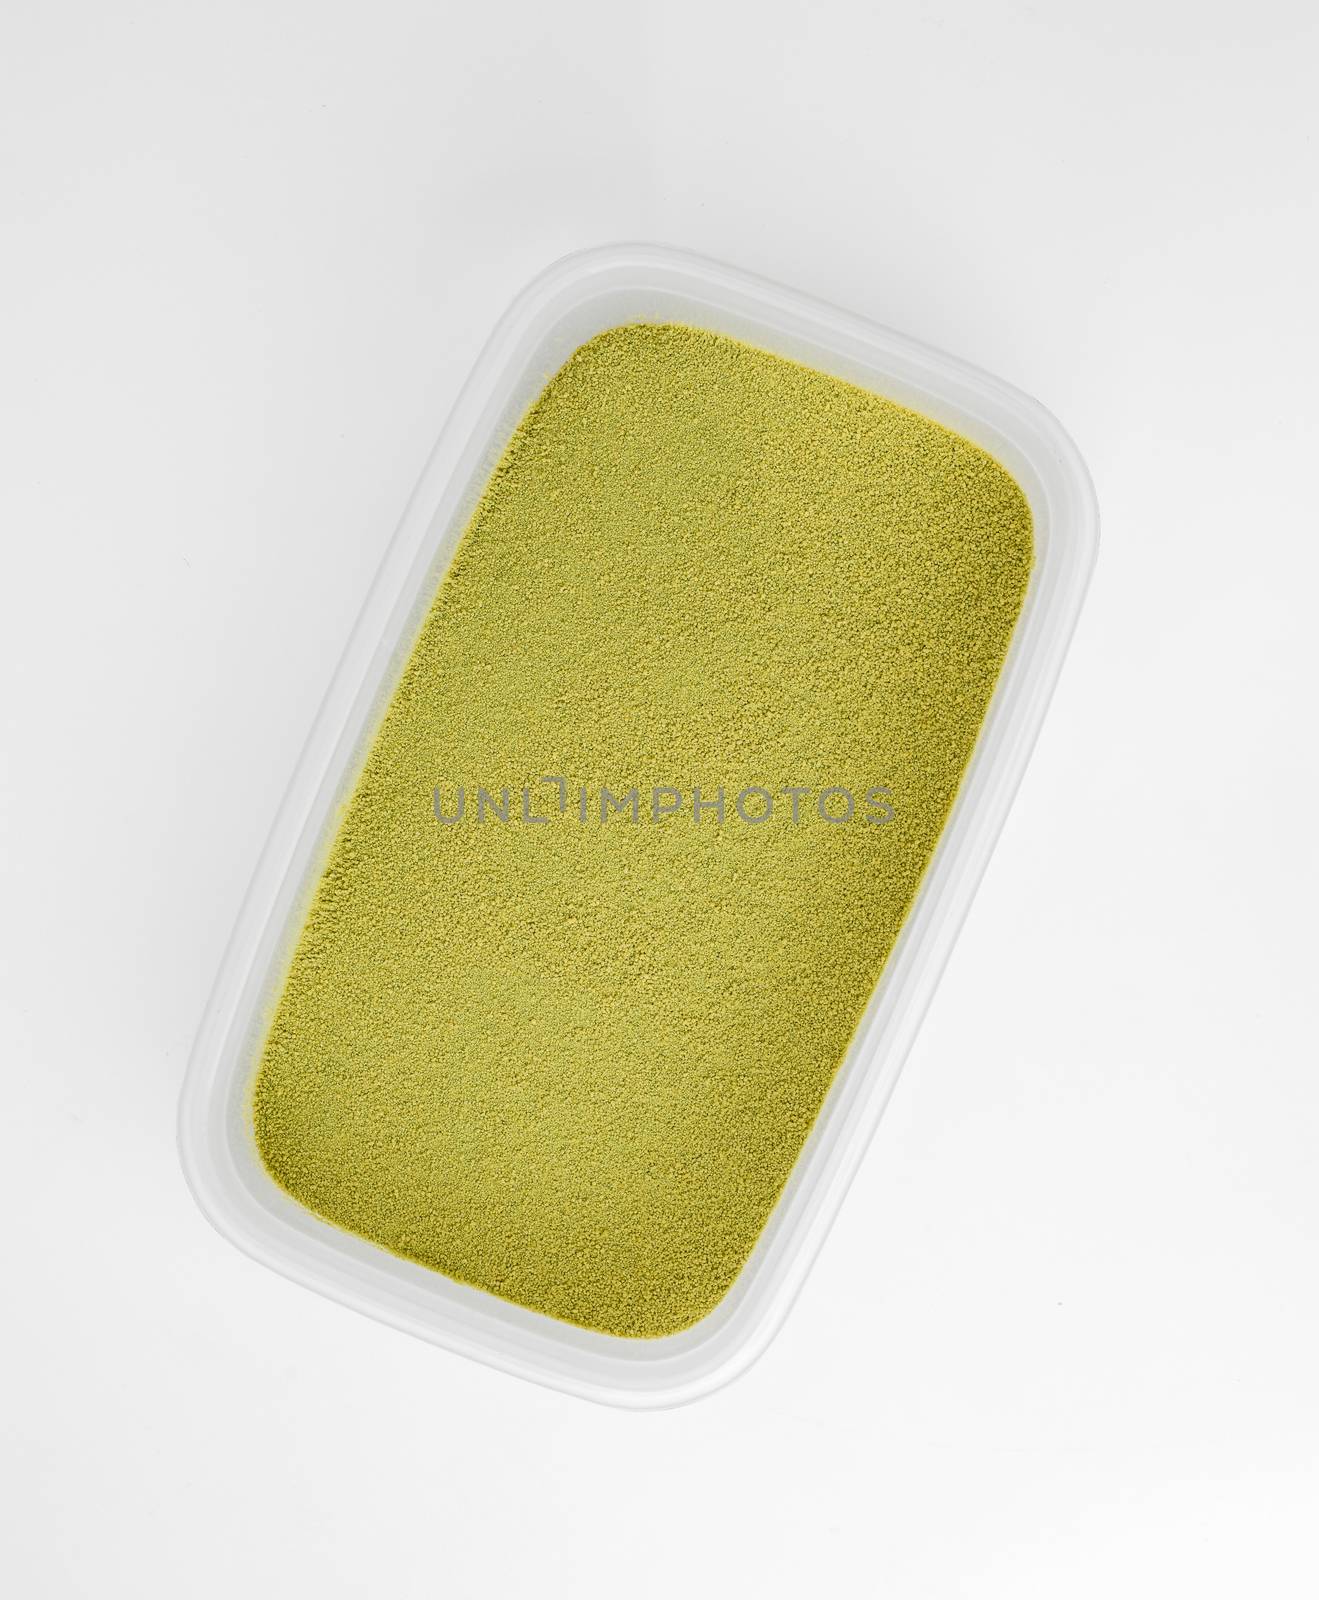 green tea powder in a box isolated on white